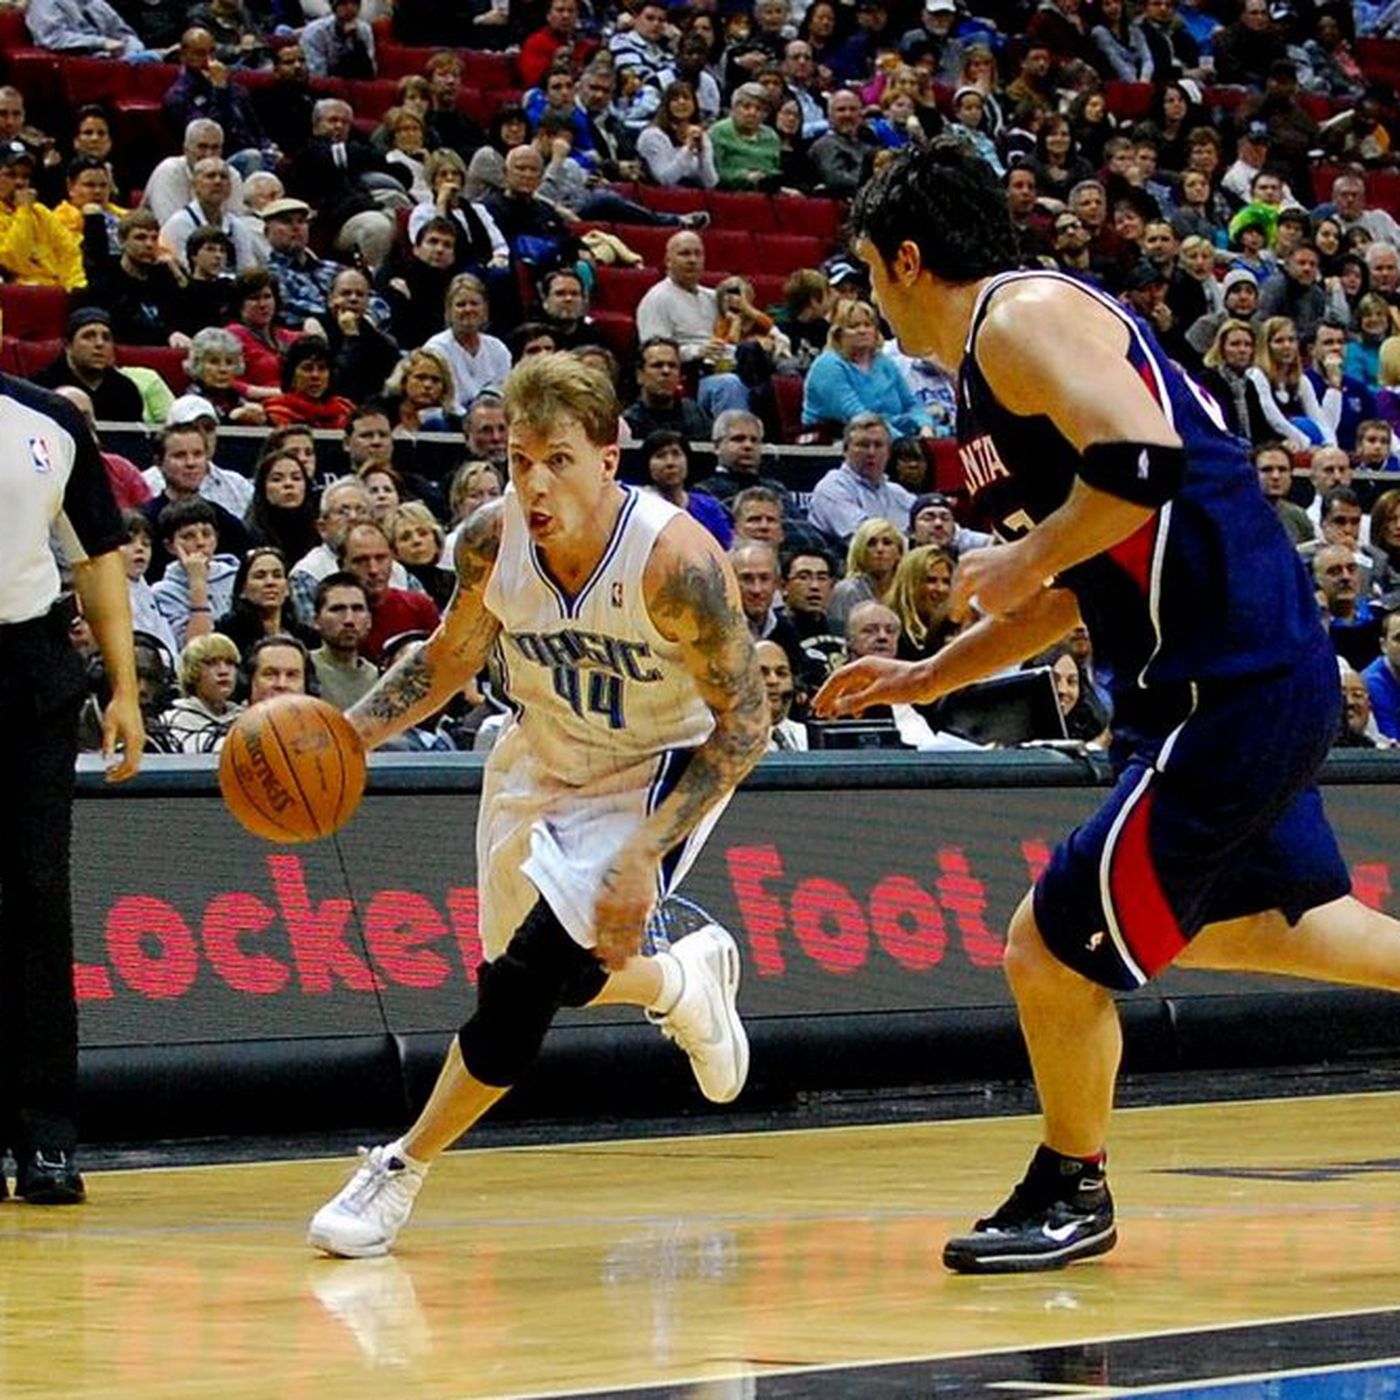 Reports: Jason Williams Leaves Orlando Magic Again; Team to Deal With Him  After Road Trip - Orlando Pinstriped Post